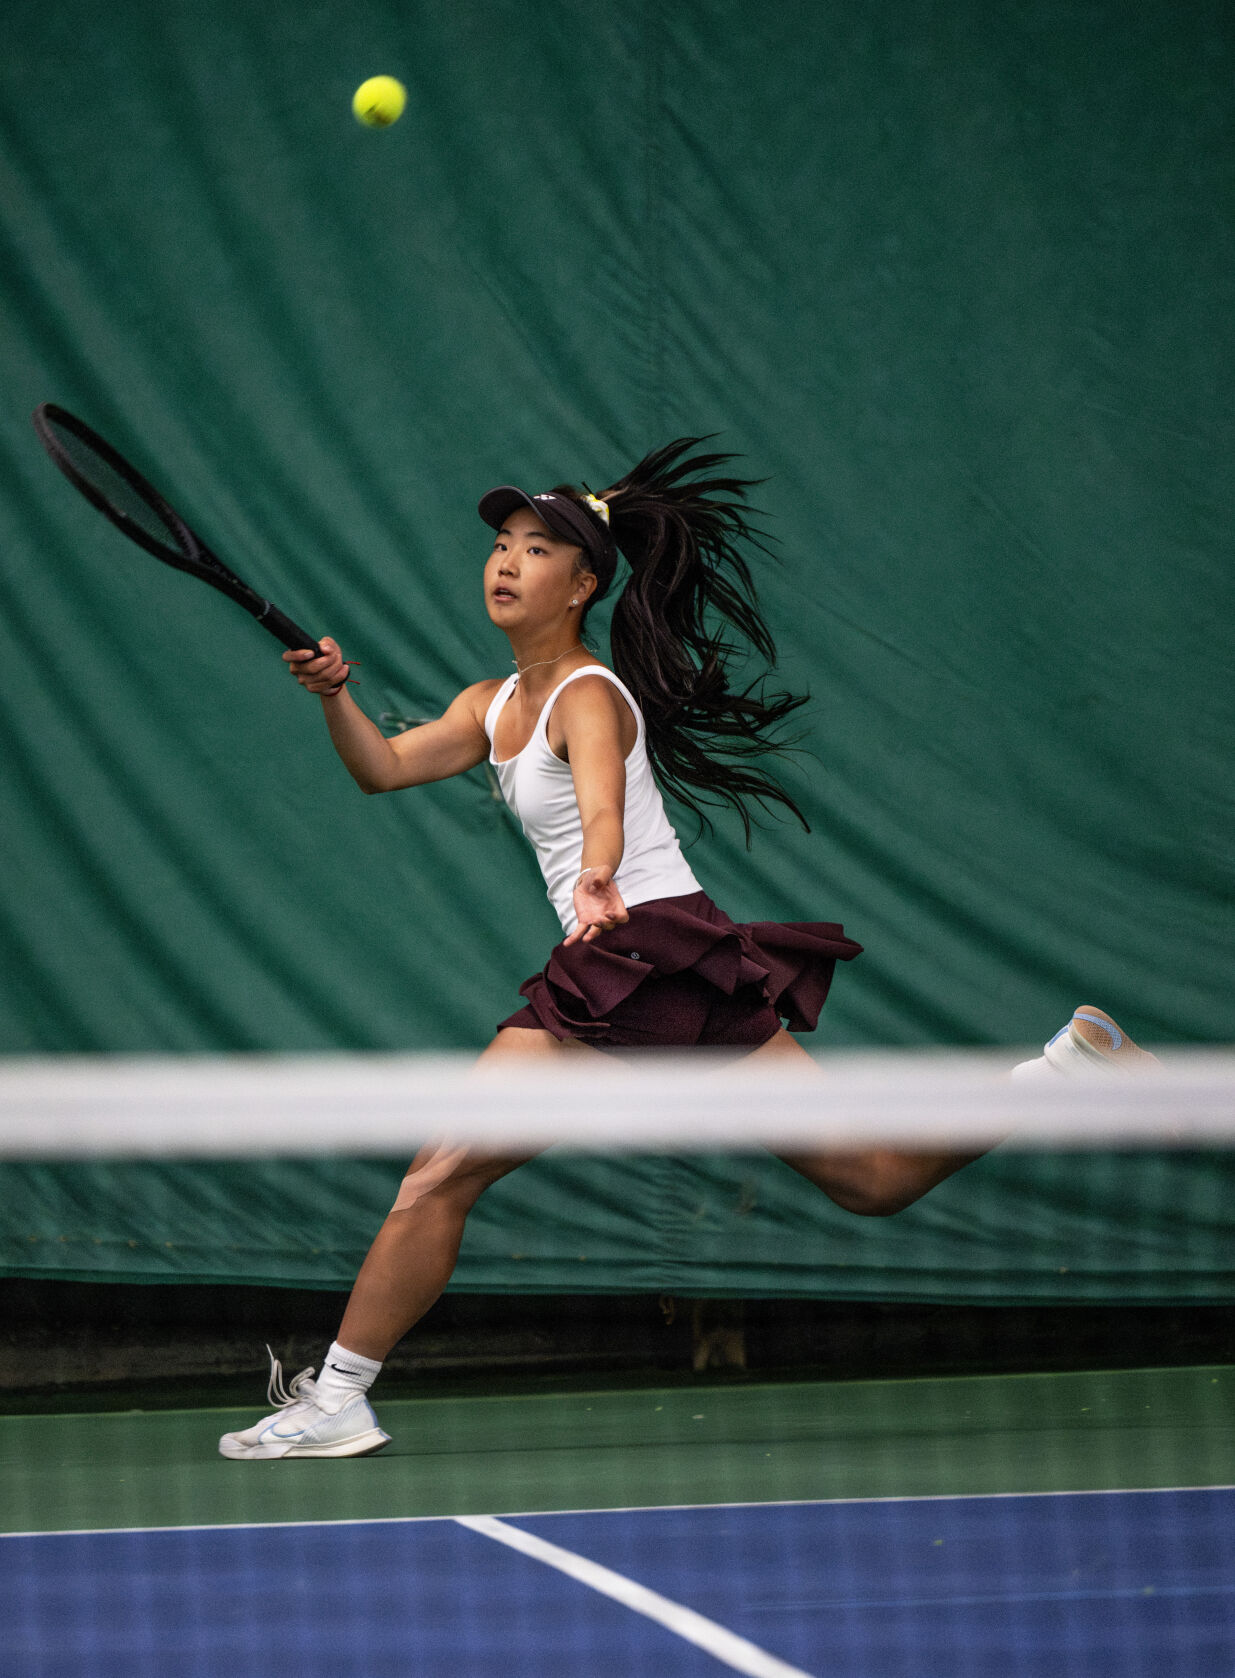 Cheyenne Mountain Shines at Girls’ Tennis State Finals with 3 Titles Claimed